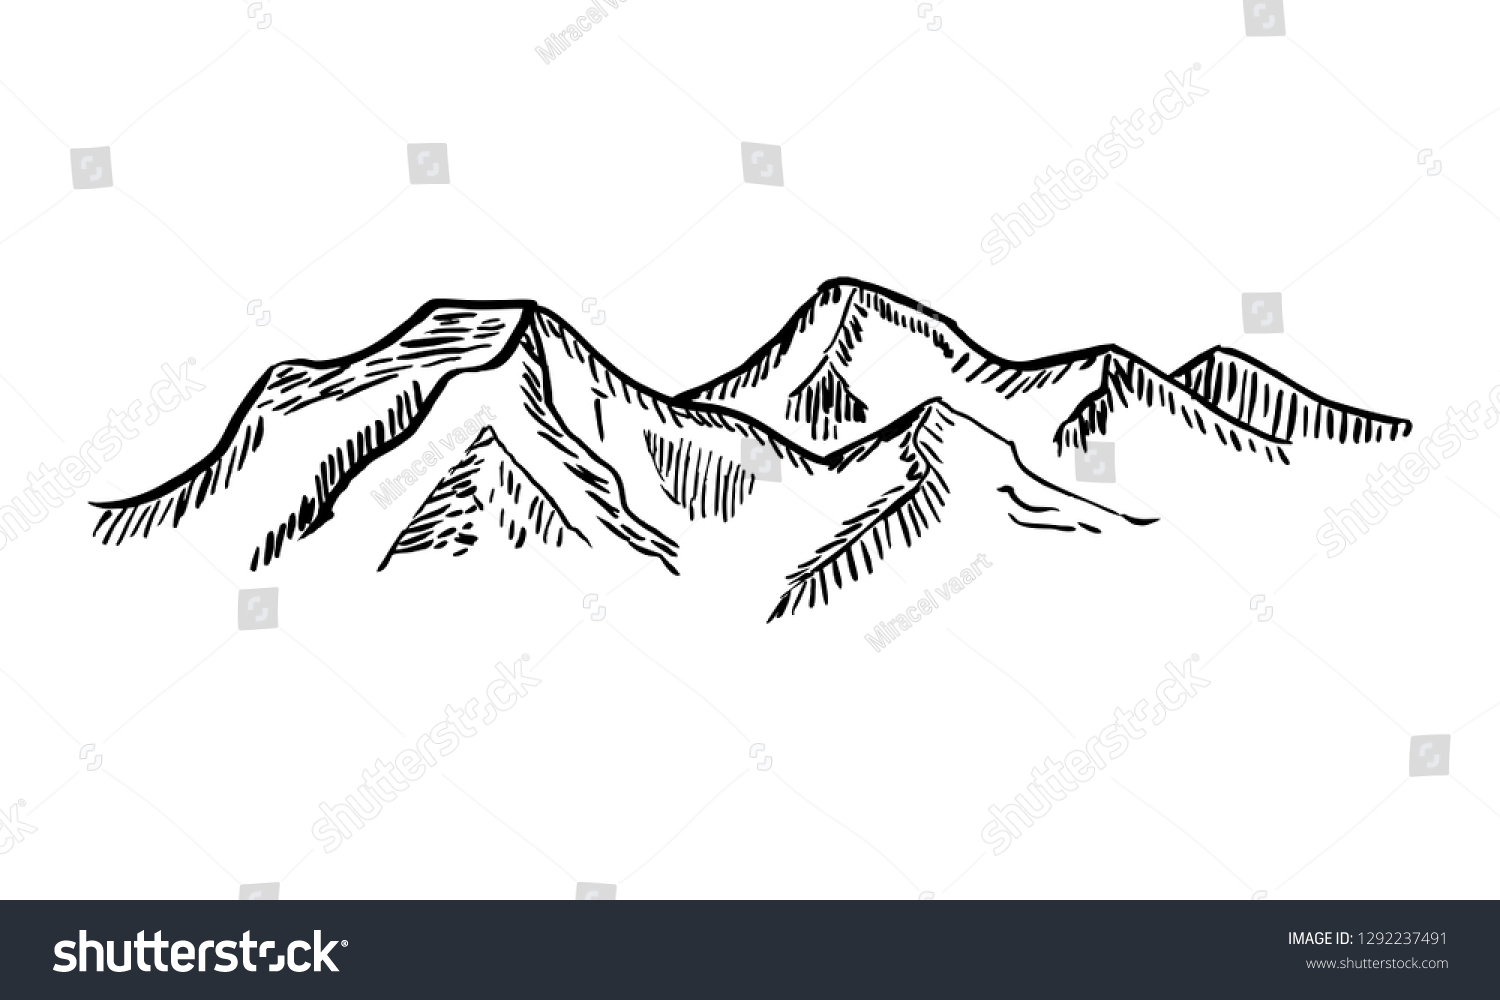 Handdrawn Mountain Isolated On White Background Stock Vector (Royalty ...